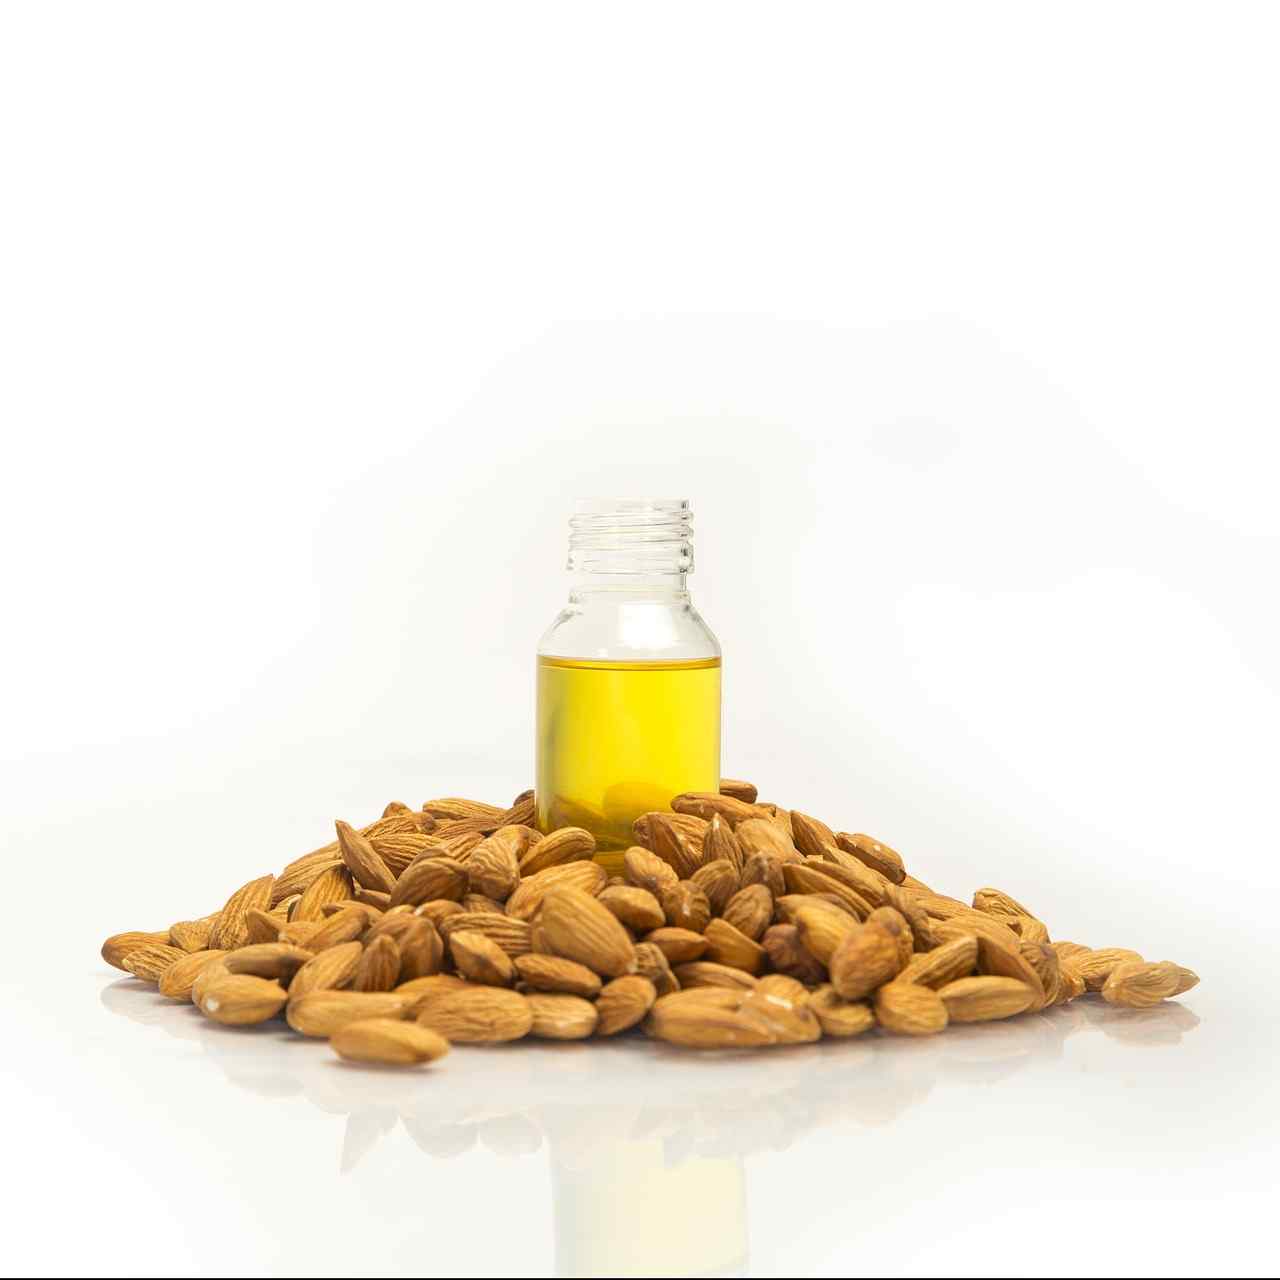 Sweet almond oil is fantastic for hair.